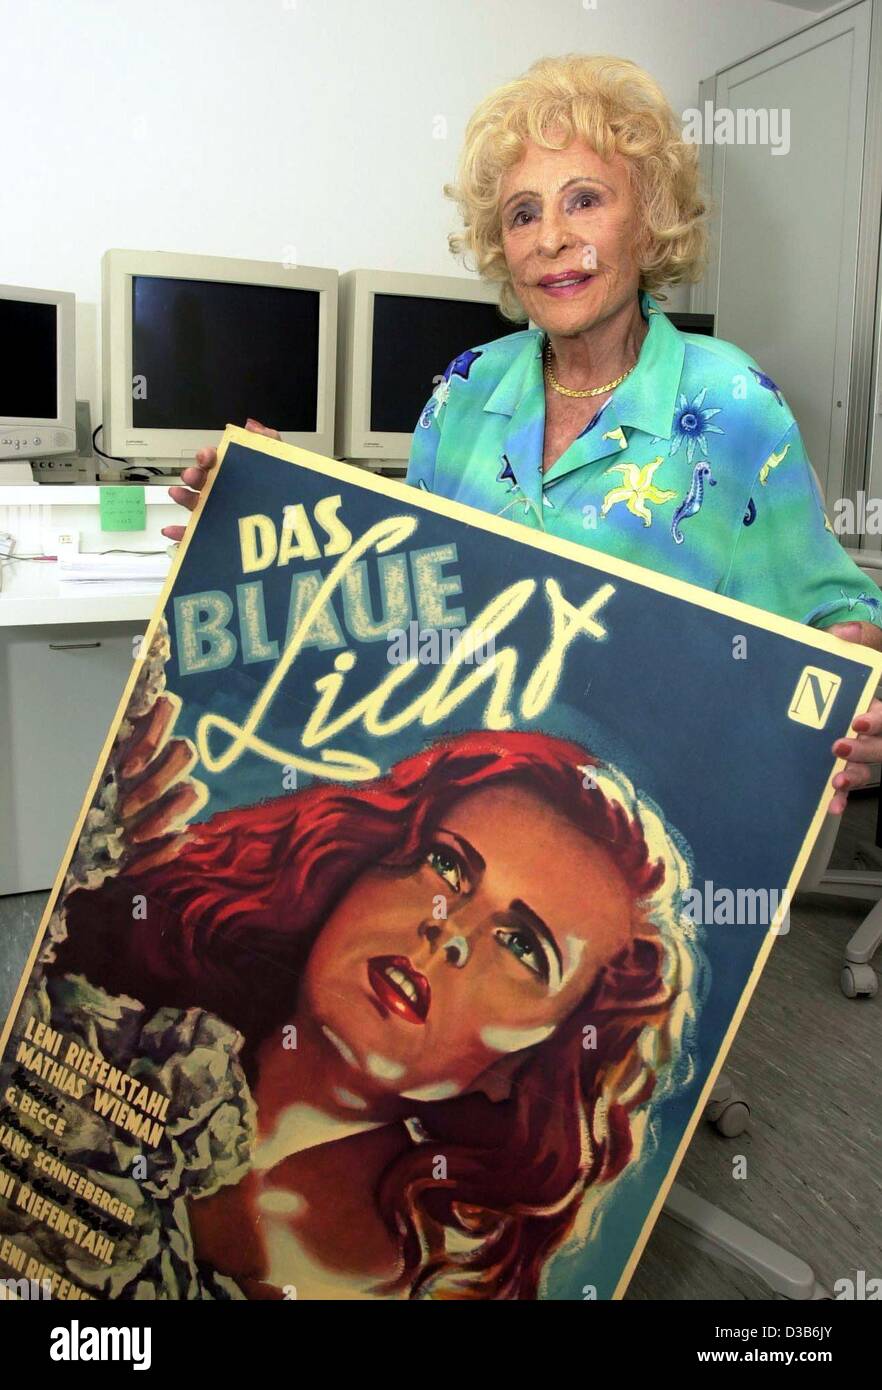 dpa) - German filmmaker Leni Riefenstahl, presents the poster of her film 'The  Blue Light' in her house in Poecking, Germany, 13 August 2002. The  outstanding but controversial director and photographer who